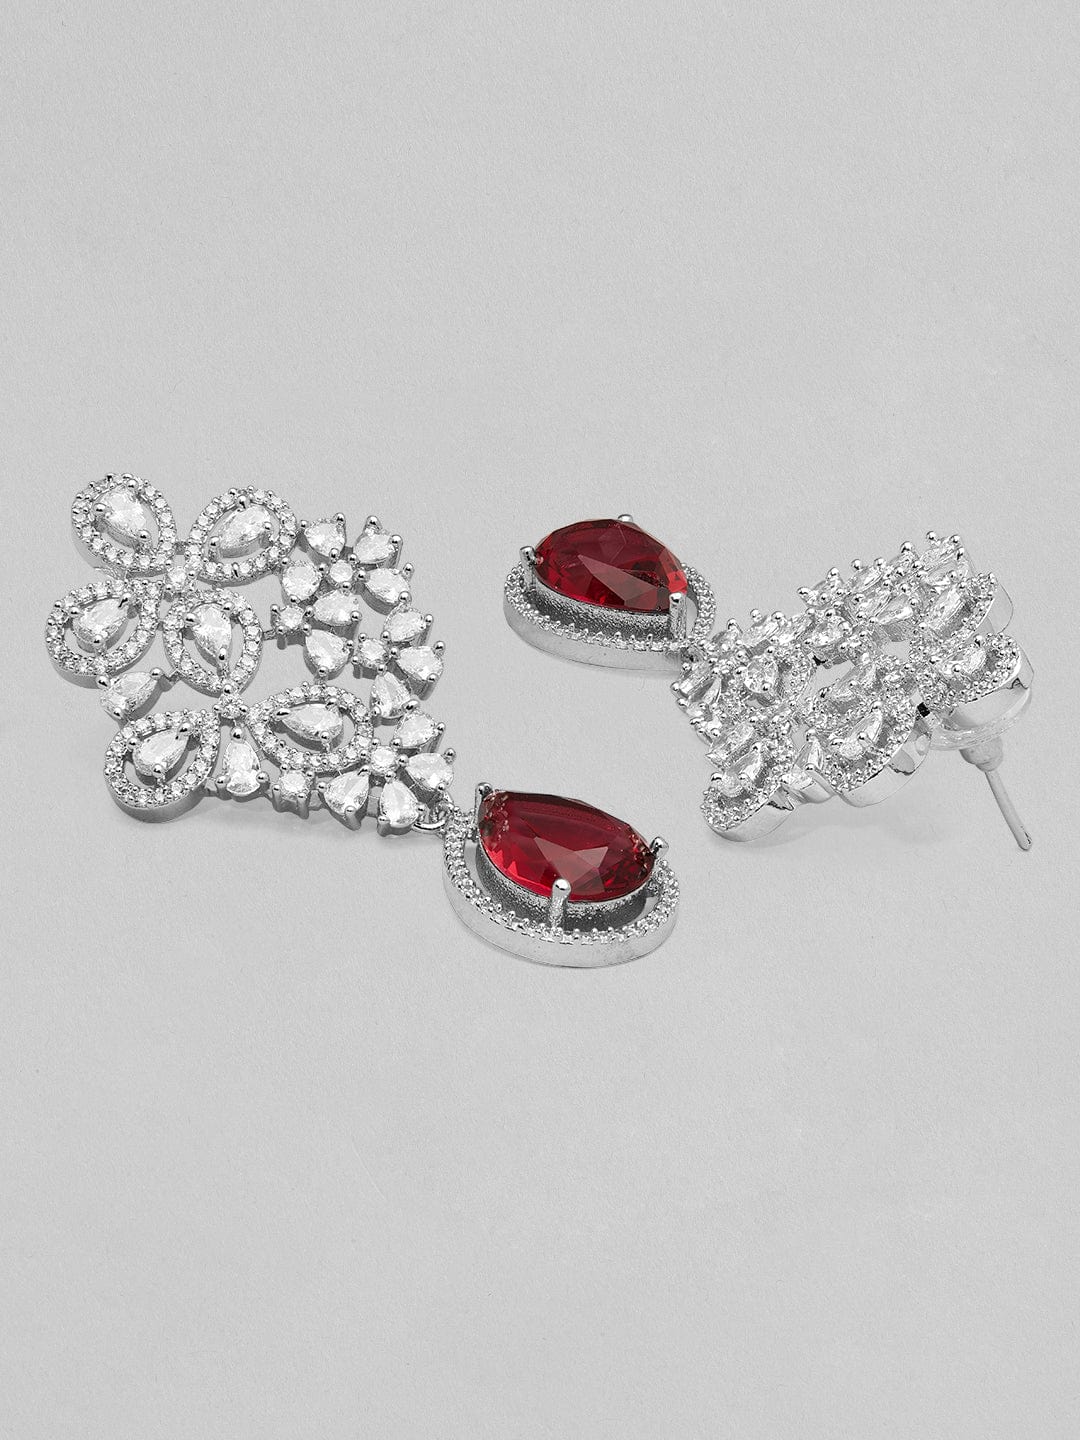 Rubans silver plated earrings with studded american diamonds and red stones. Earrings